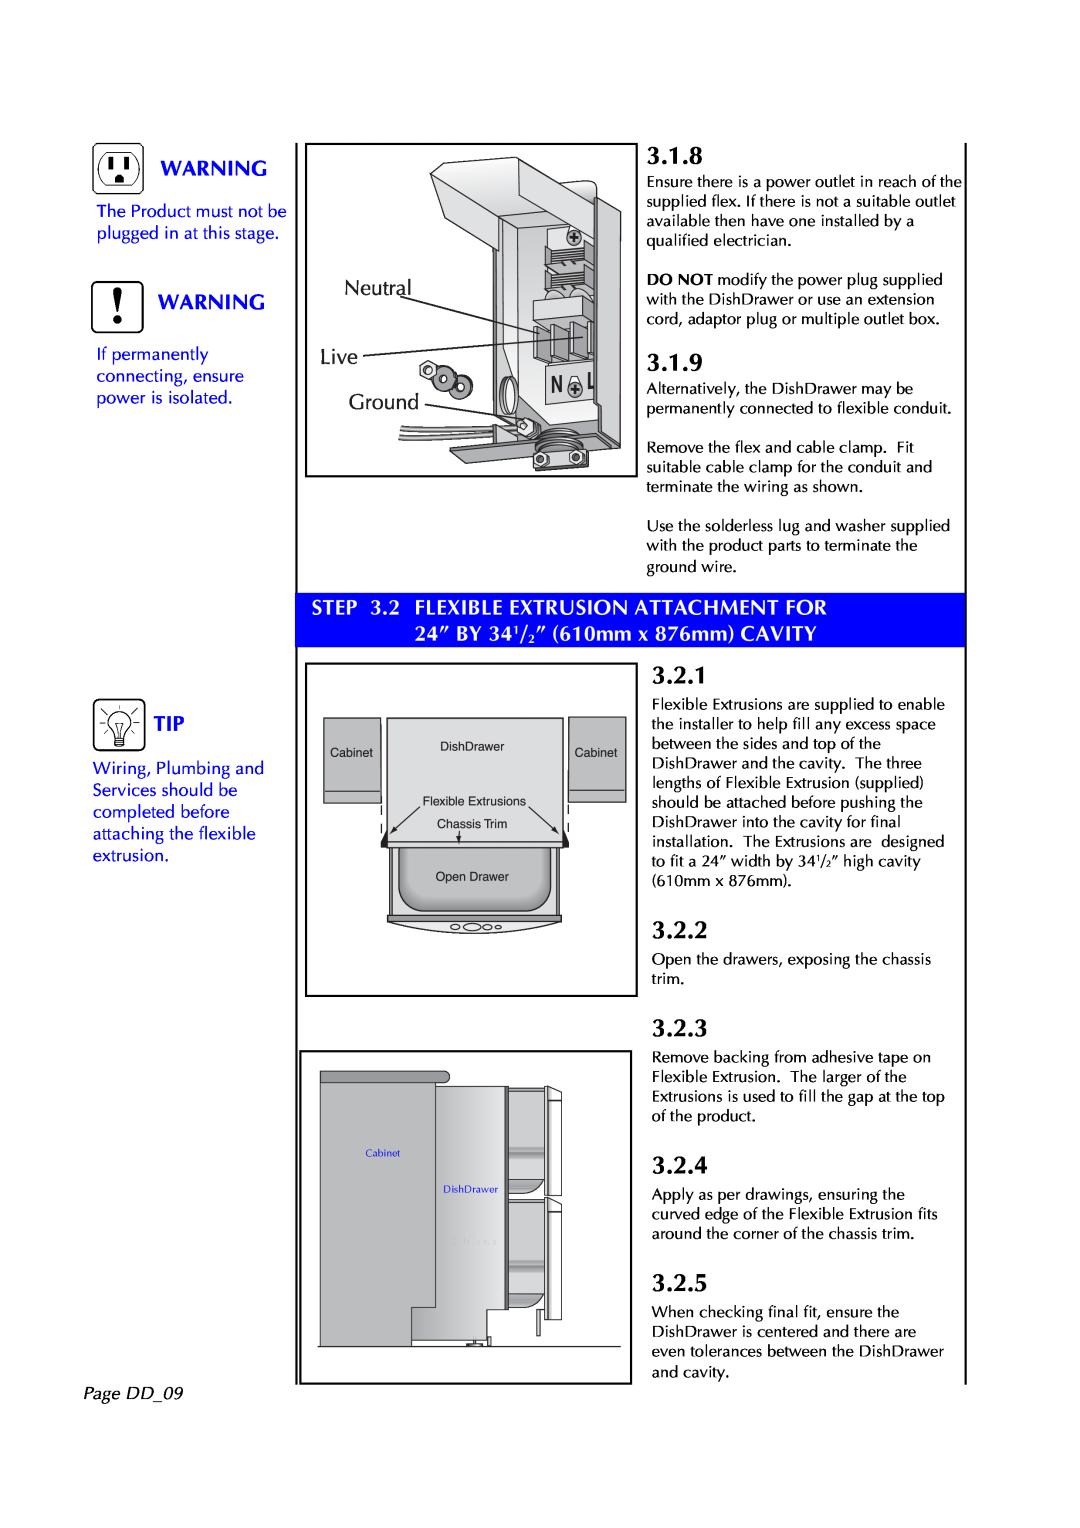 Fisher & Paykel DD602 3.1.8, 3.1.9, 3.2.1, 3.2.2, 3.2.3, 3.2.4, 3.2.5, If permanently connecting, ensure power is isolated 